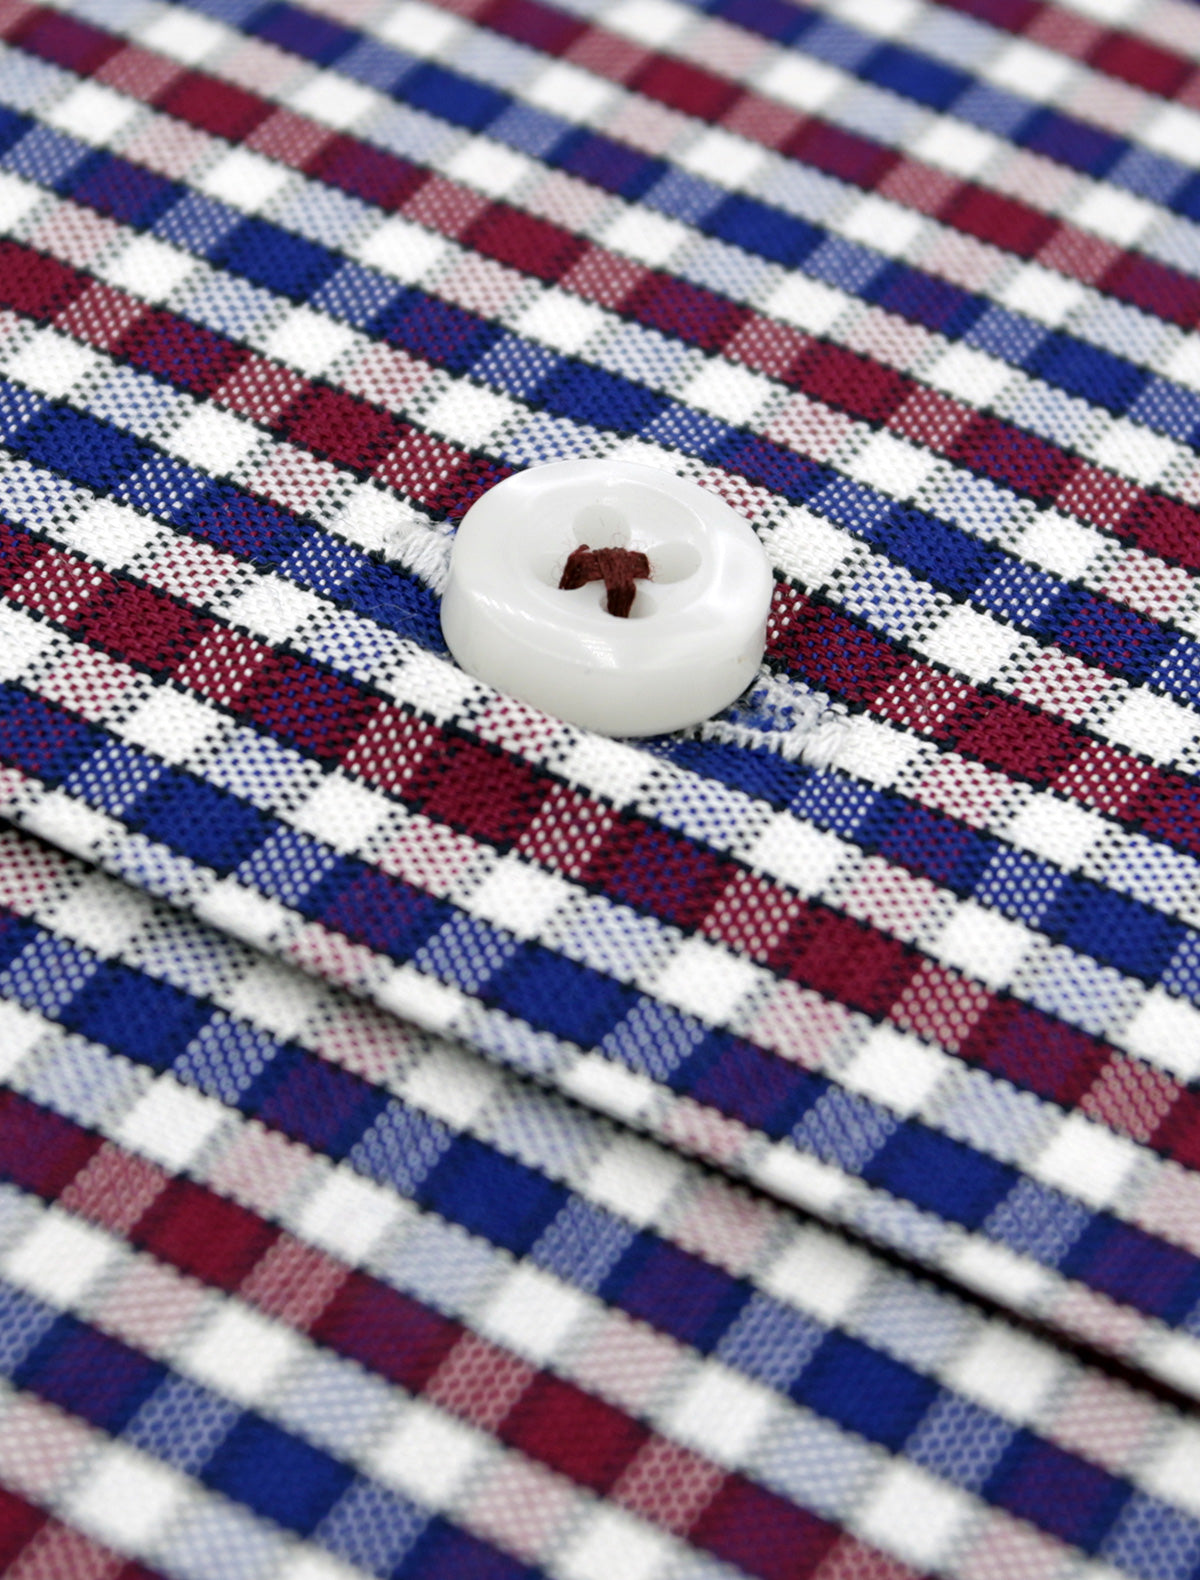 Red and Blue check shirt